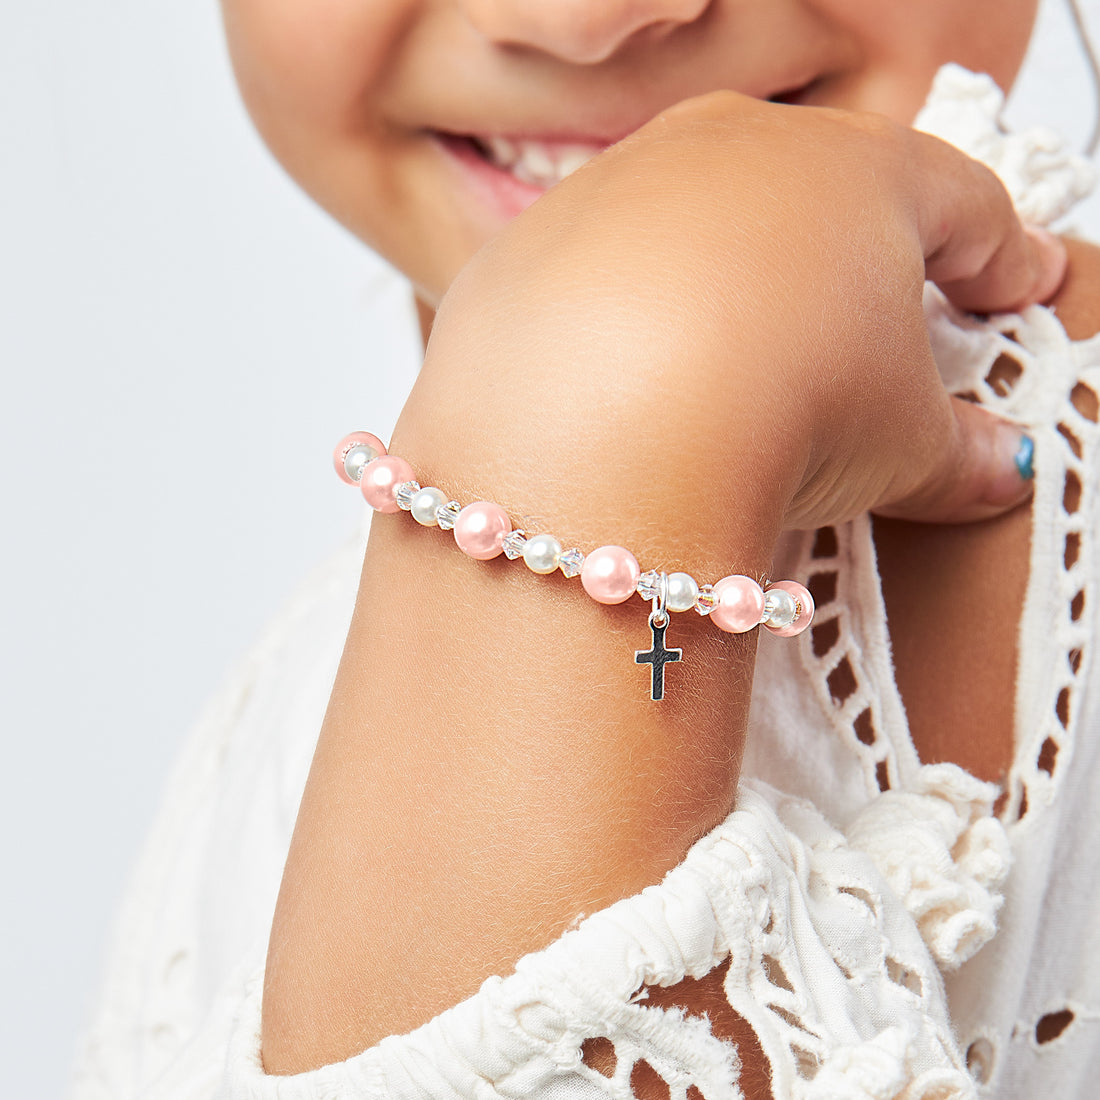 Buy Baby Crystals Christening Bracelet - Sterling Silver Cross Charm  Bracelet - Little Girls Jewelry Gift Christening Favors Baptism Gifts for  Little Girl (18 Months-4 Years) at Amazon.in